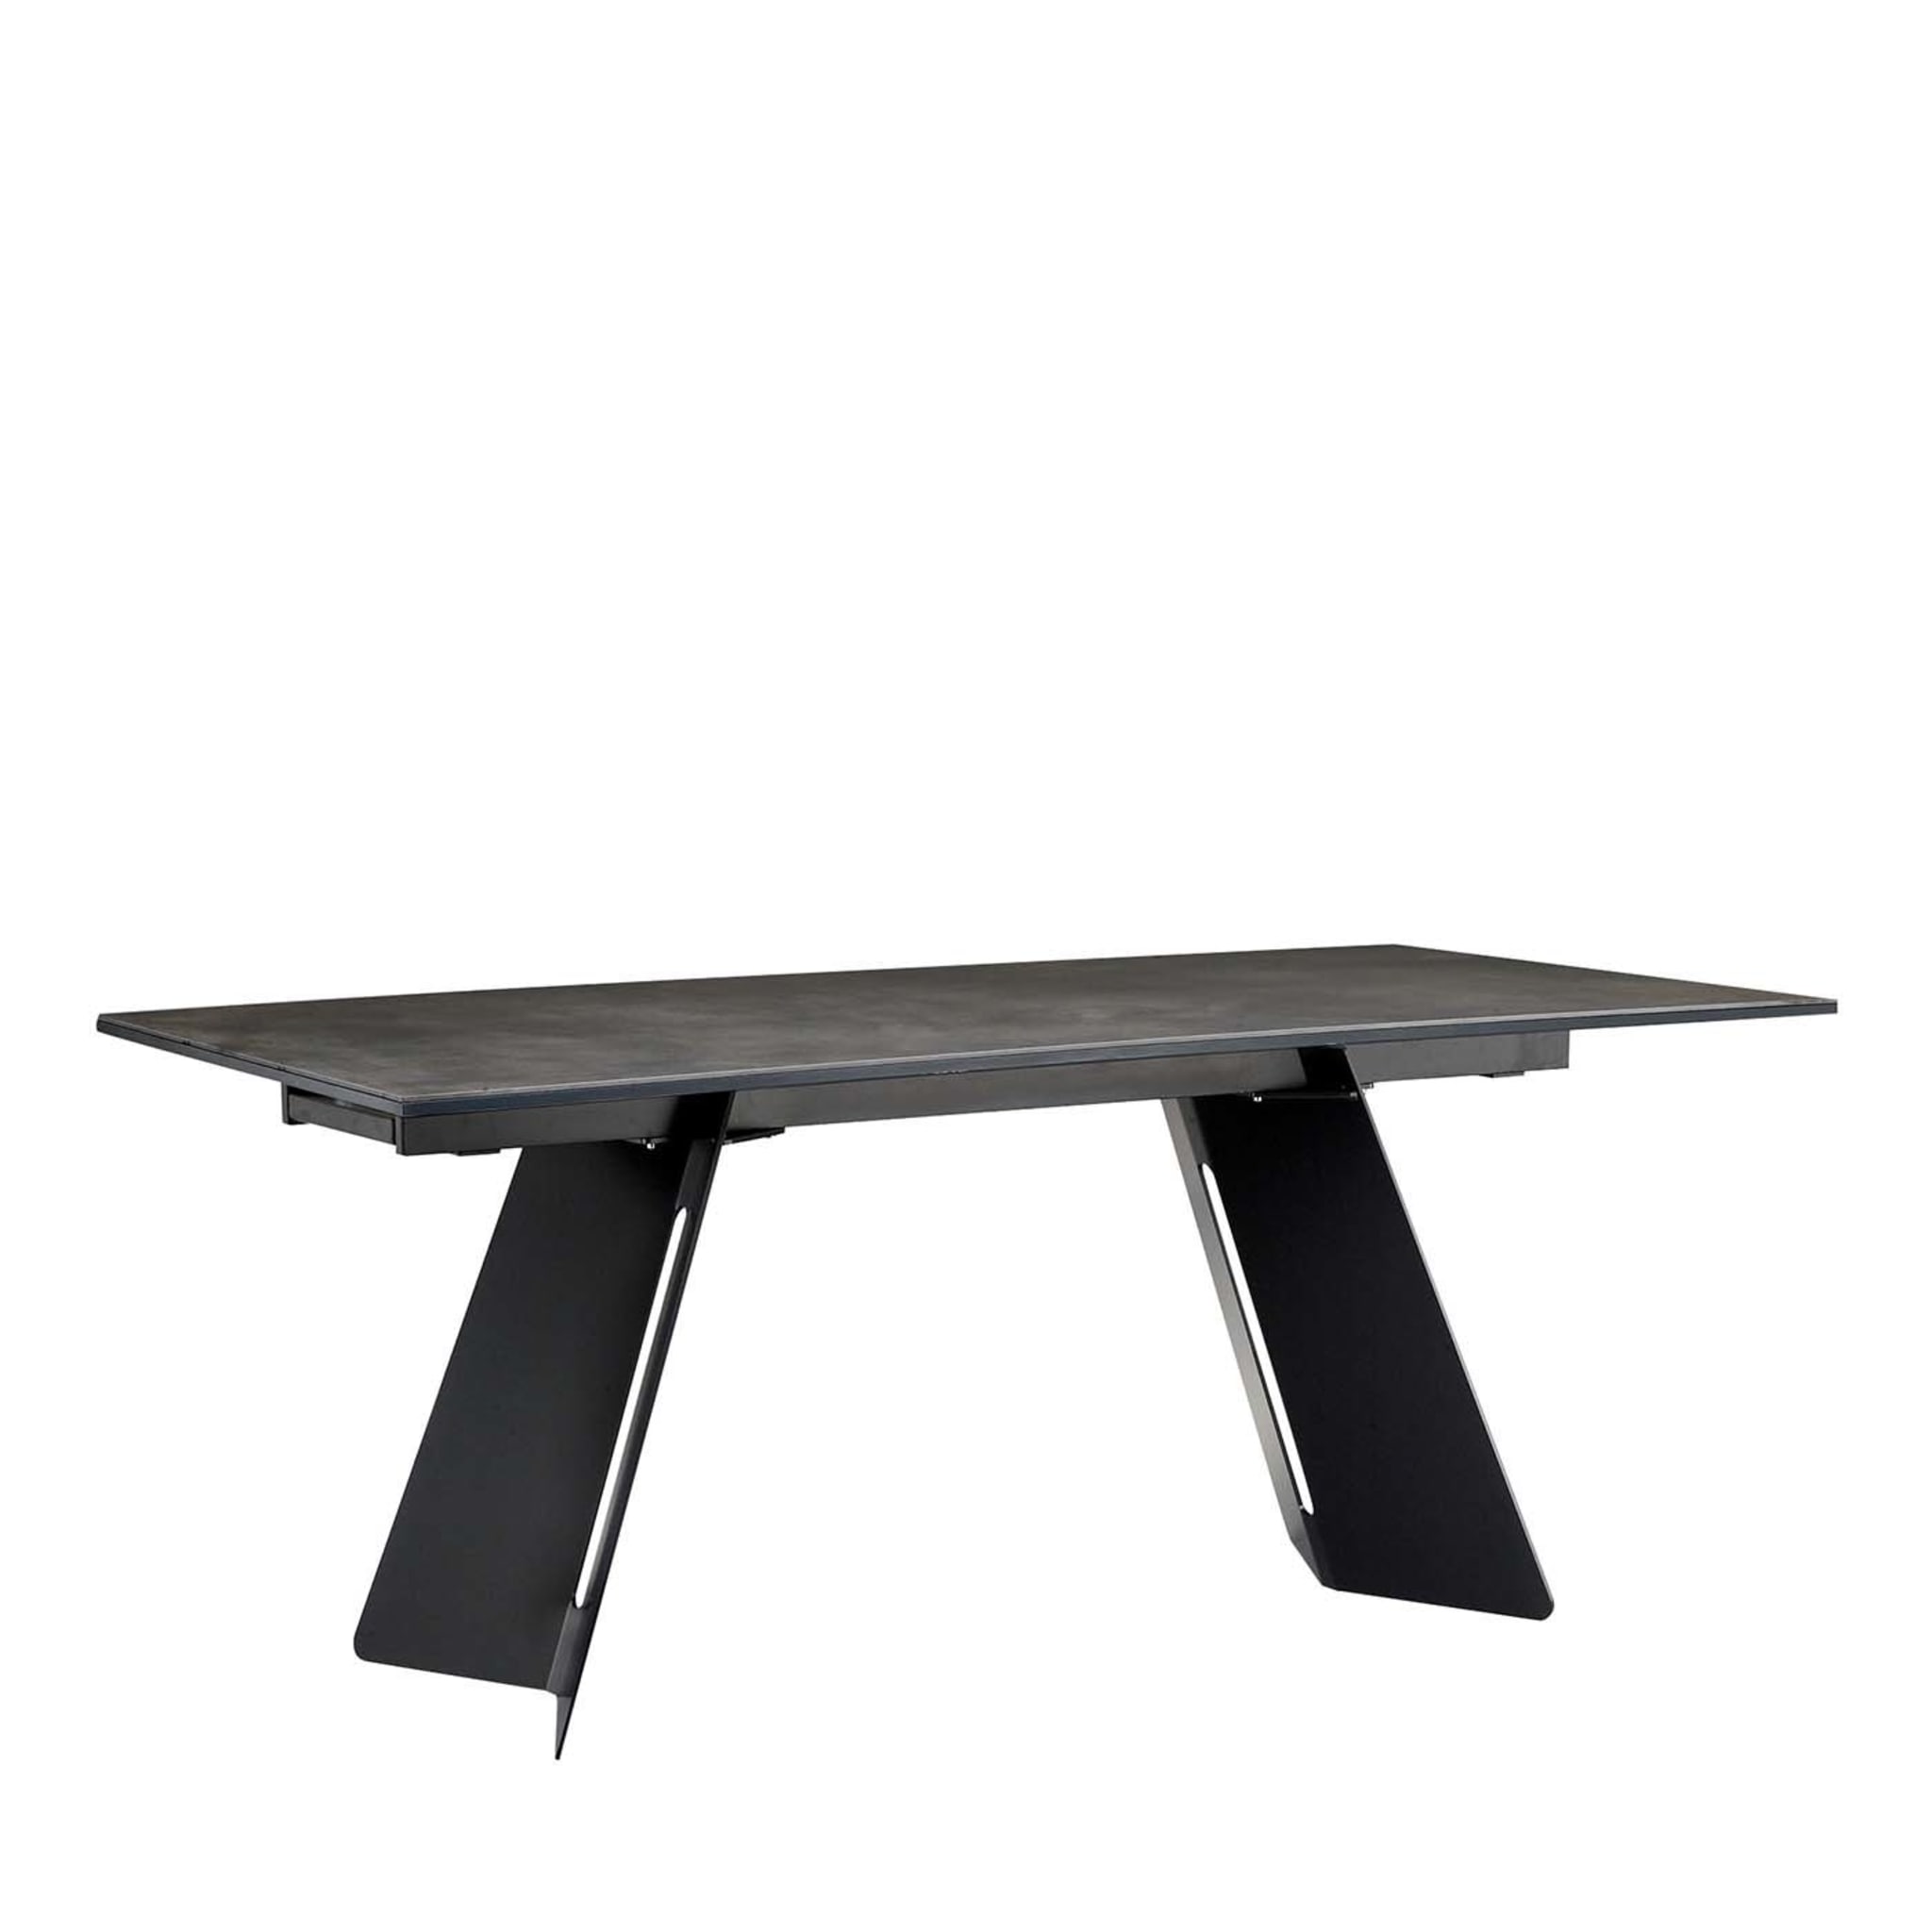 Koral 180 A Dining Table #2 - Main view